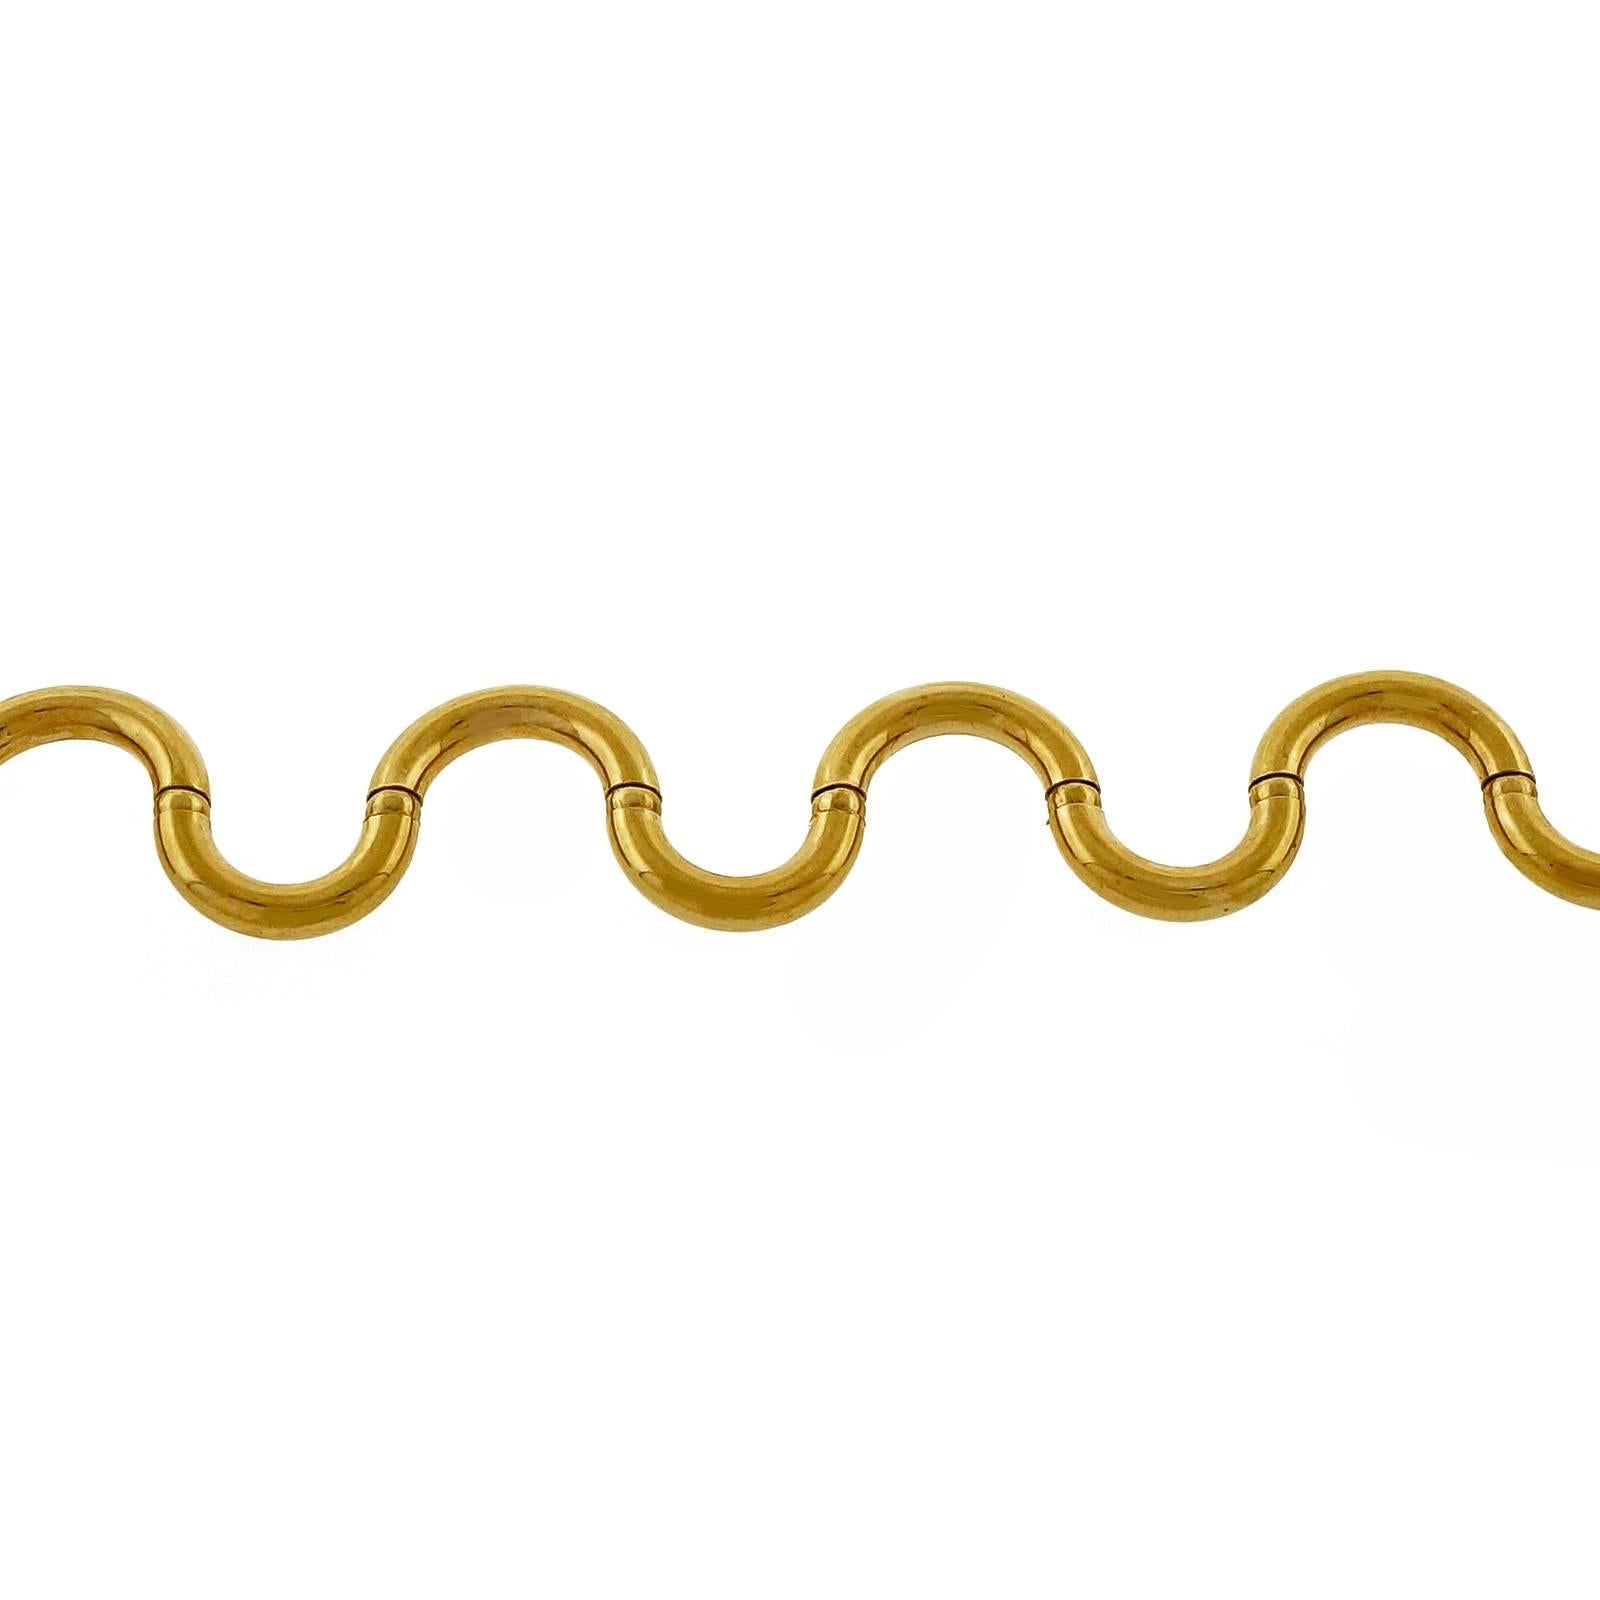 UNOAERRE 1970's Italian unique Brev swirl hinged link necklace, 16 inches long, circa 1970-1980.

18k yellow gold
26.7 grams
Tested: 18k
Stamped: 750
Hallmark: BREV
Length: 16 inches – Width: 6.10mm – Depth: 3.19mm
